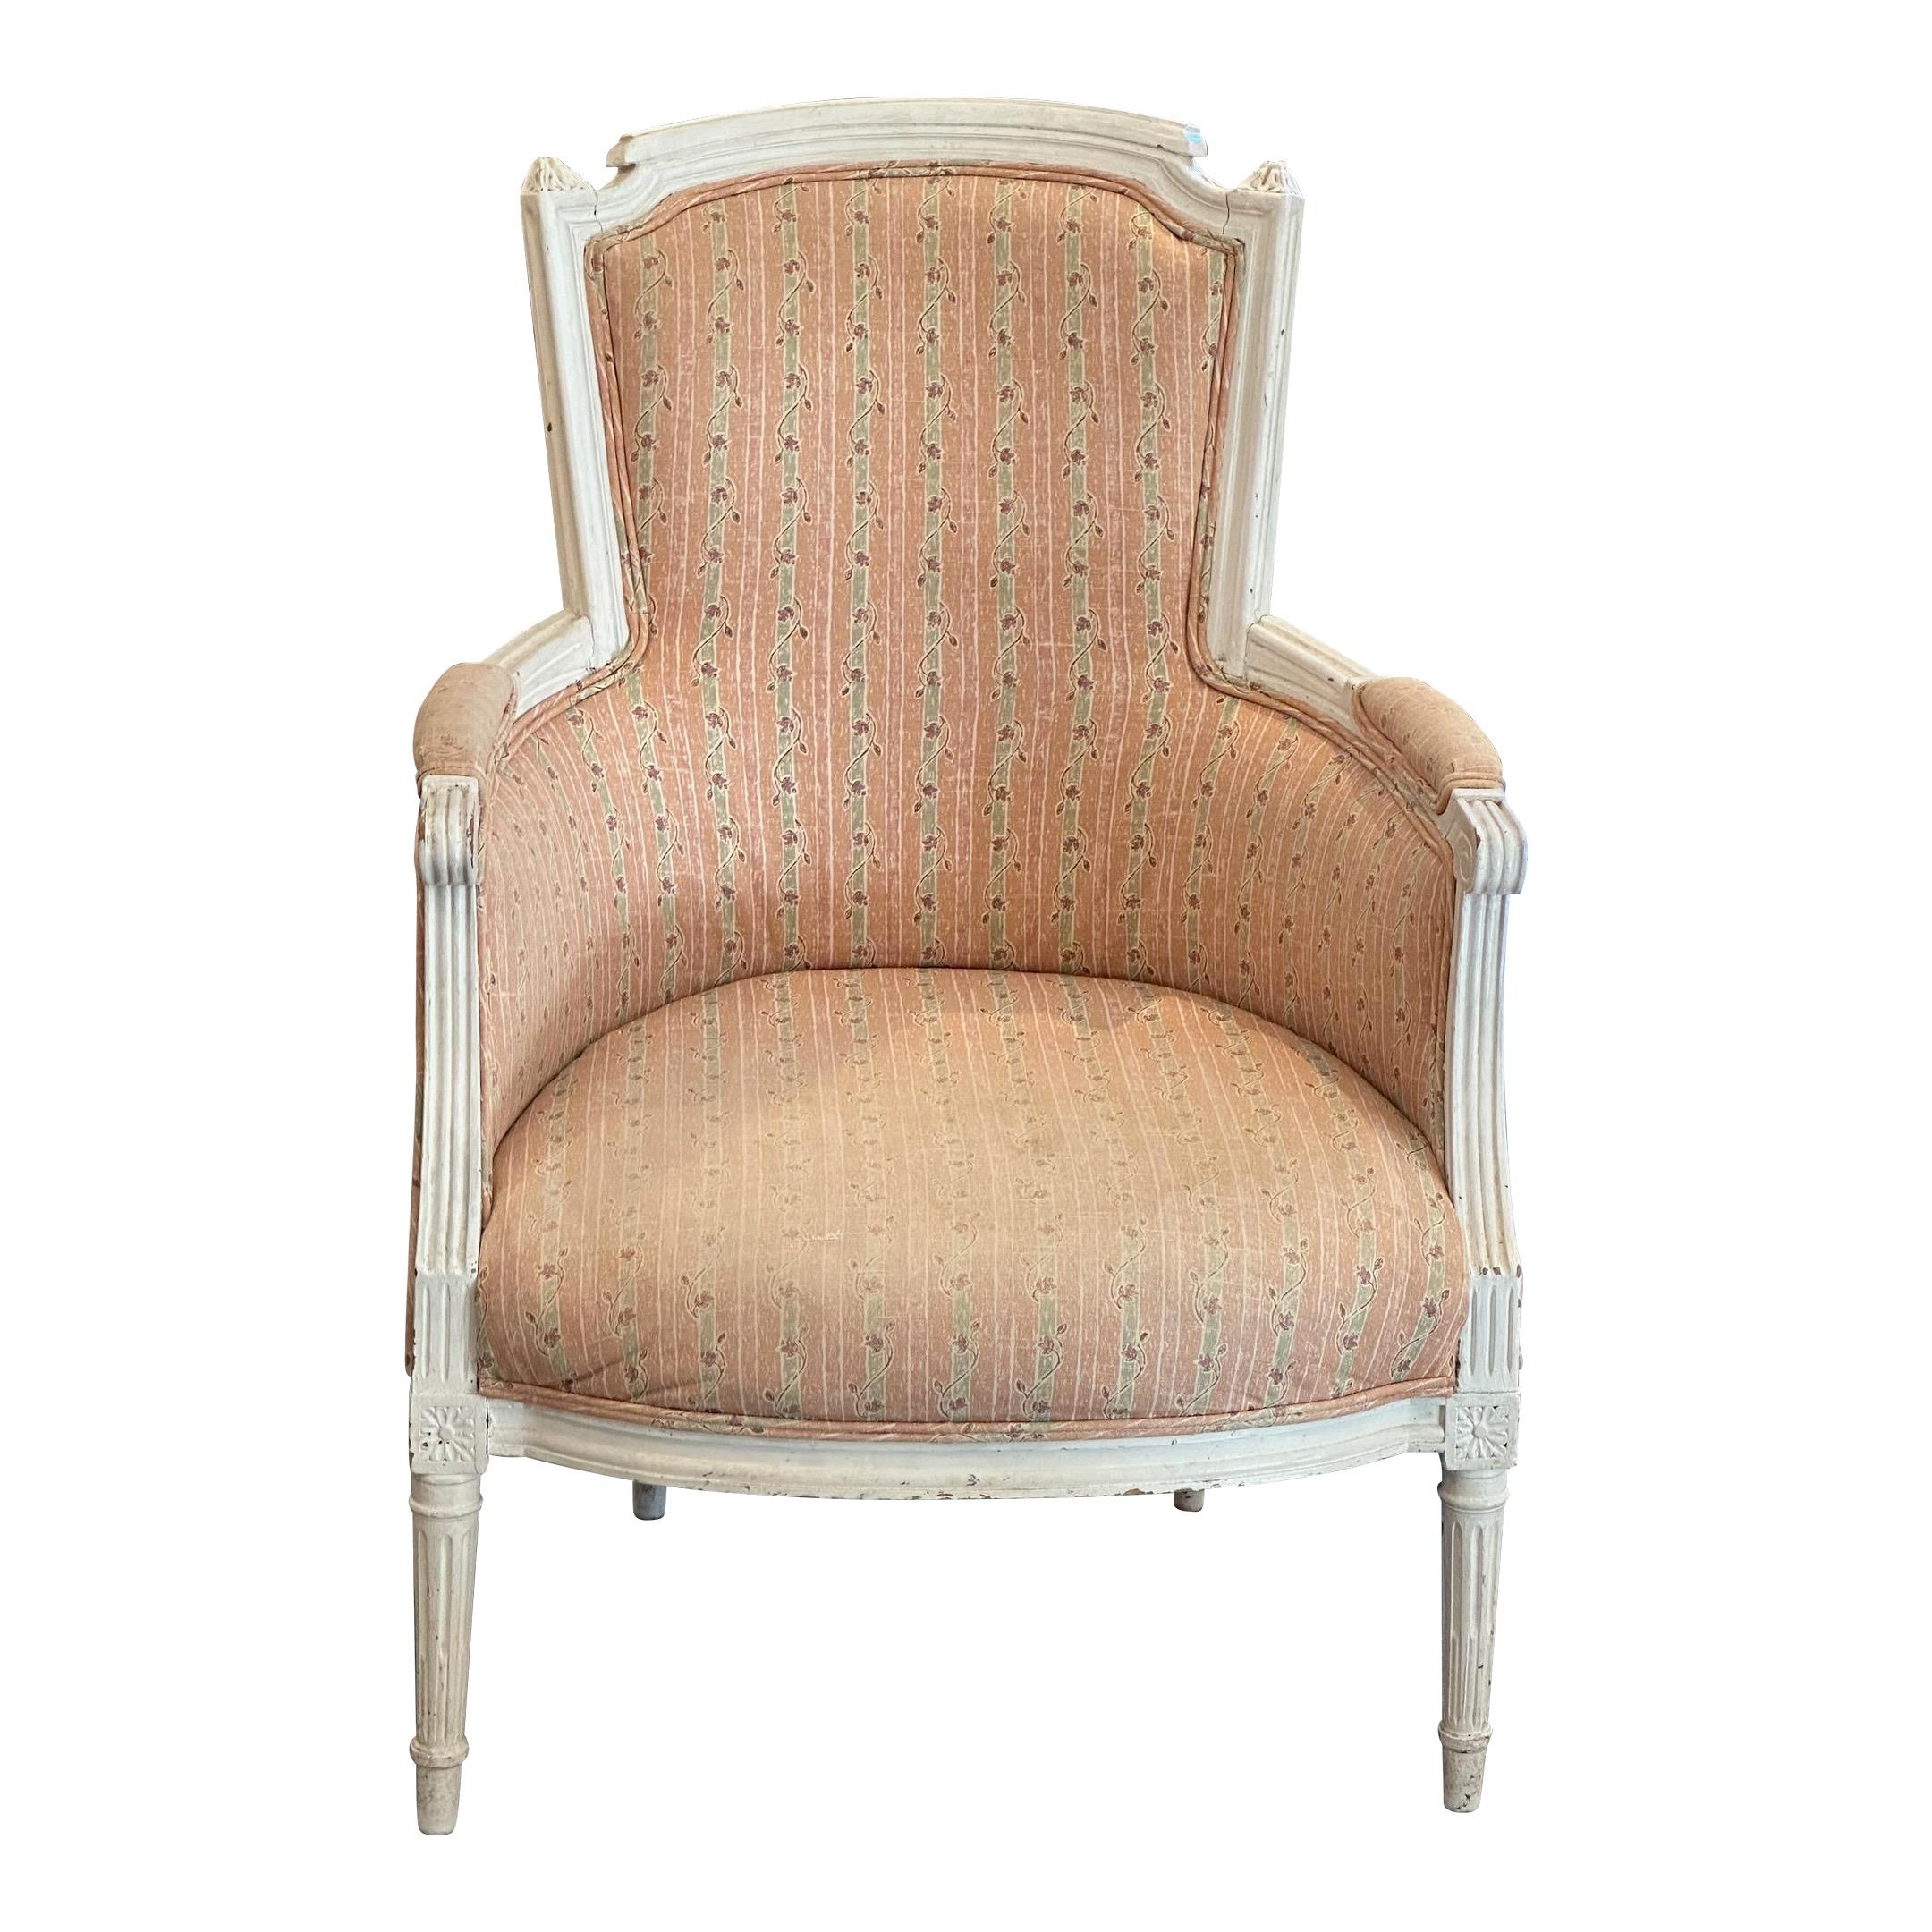 Early 20th Century French Bergere Chair For Sale